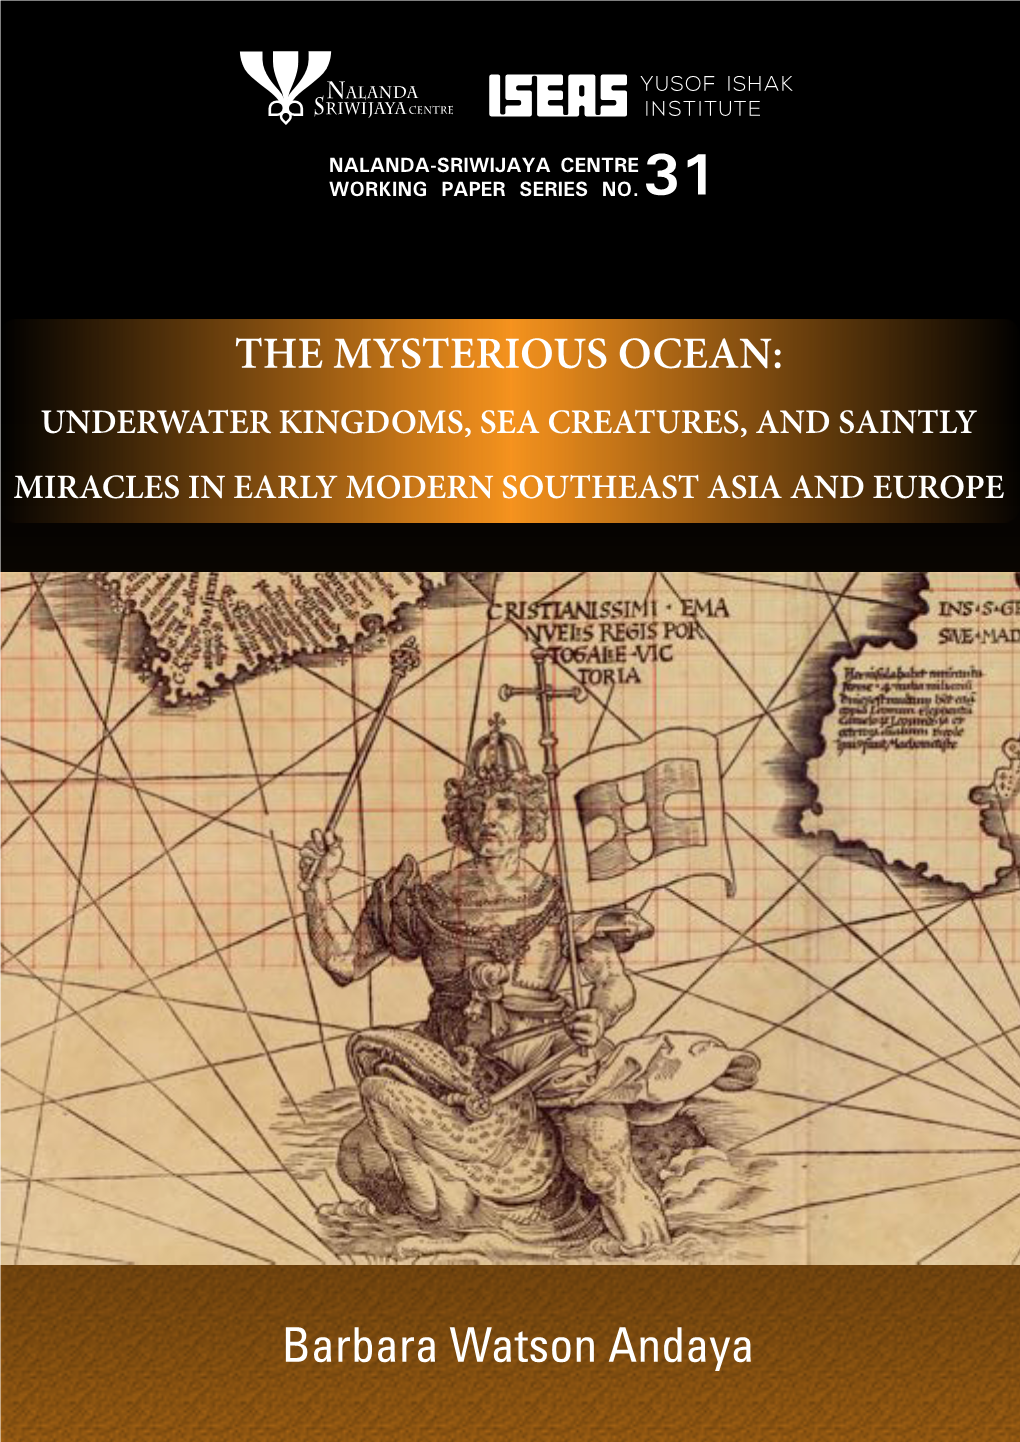 Barbara Watson Andaya the MYSTERIOUS OCEAN: UNDERWATER KINGDOMS, SEA CREATURES, and SAINTLY MIRACLES in EARLY MODERN SOUTHEAST ASIA and EUROPE